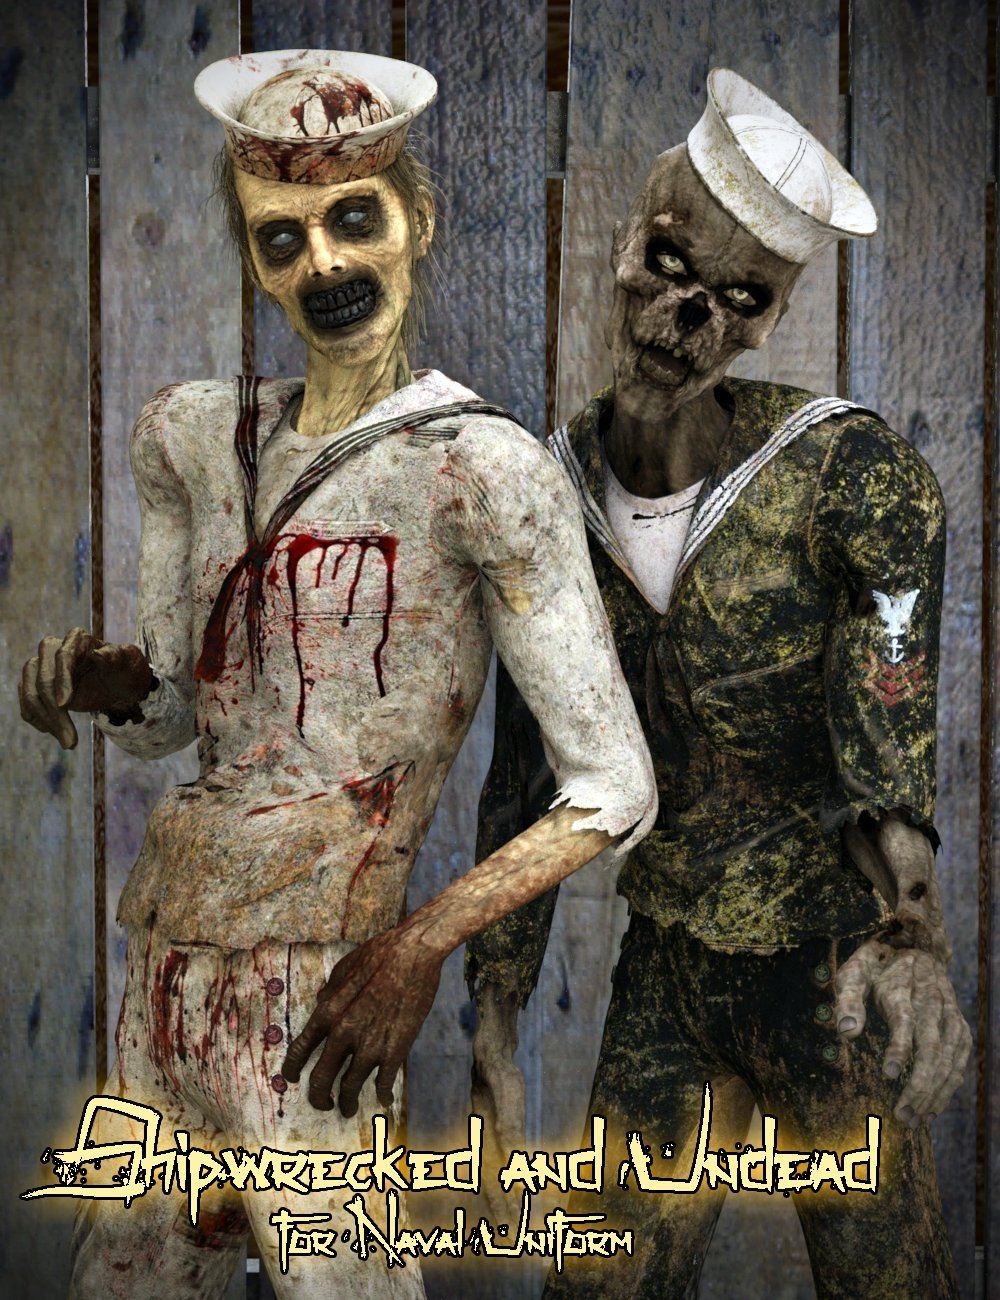 Shipwrecked and Undead for Naval Uniform_DAZ3DDL